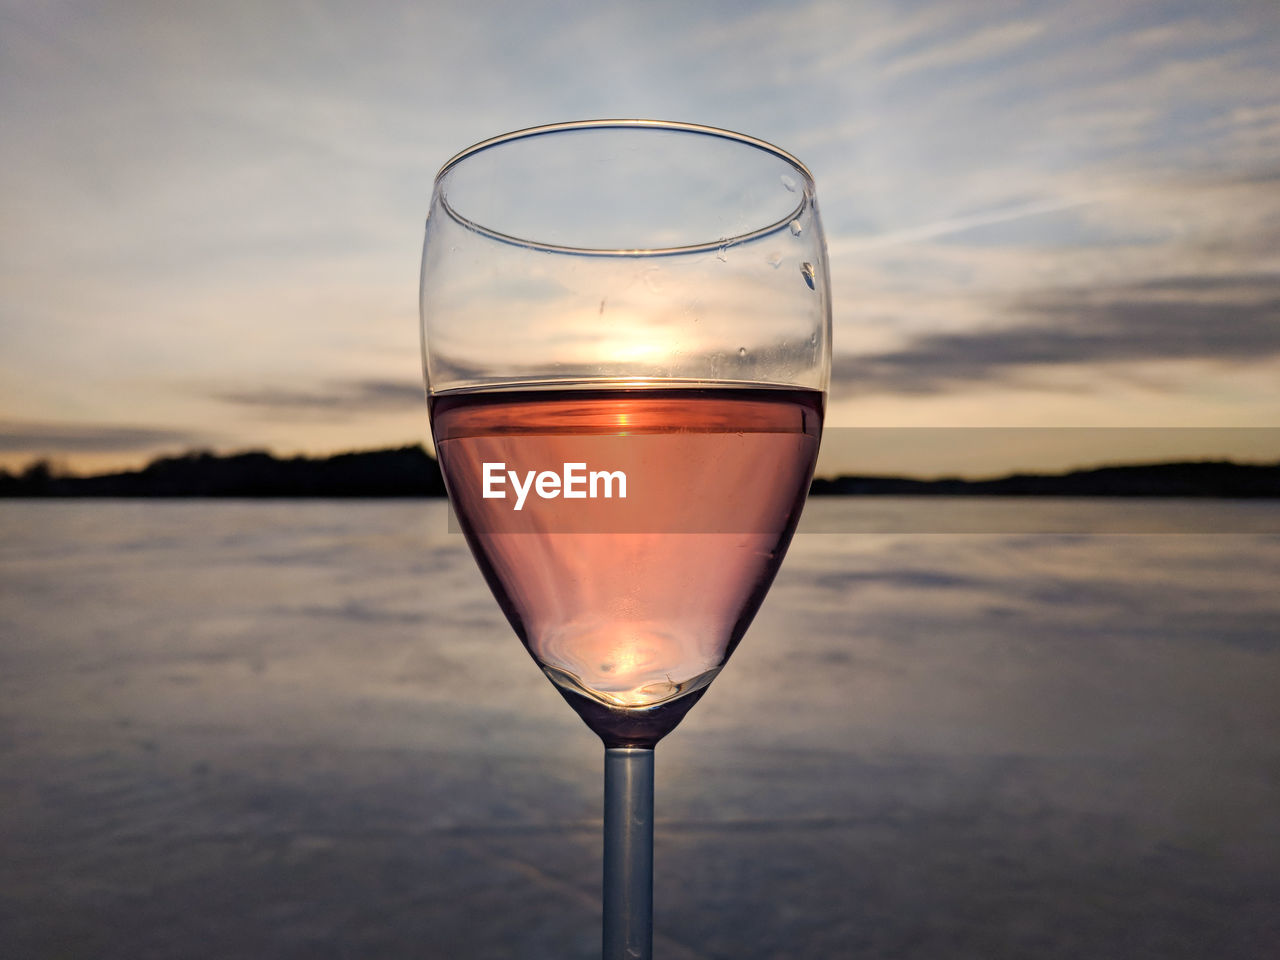 Glass of rose wine held up to sunset over frozen lake